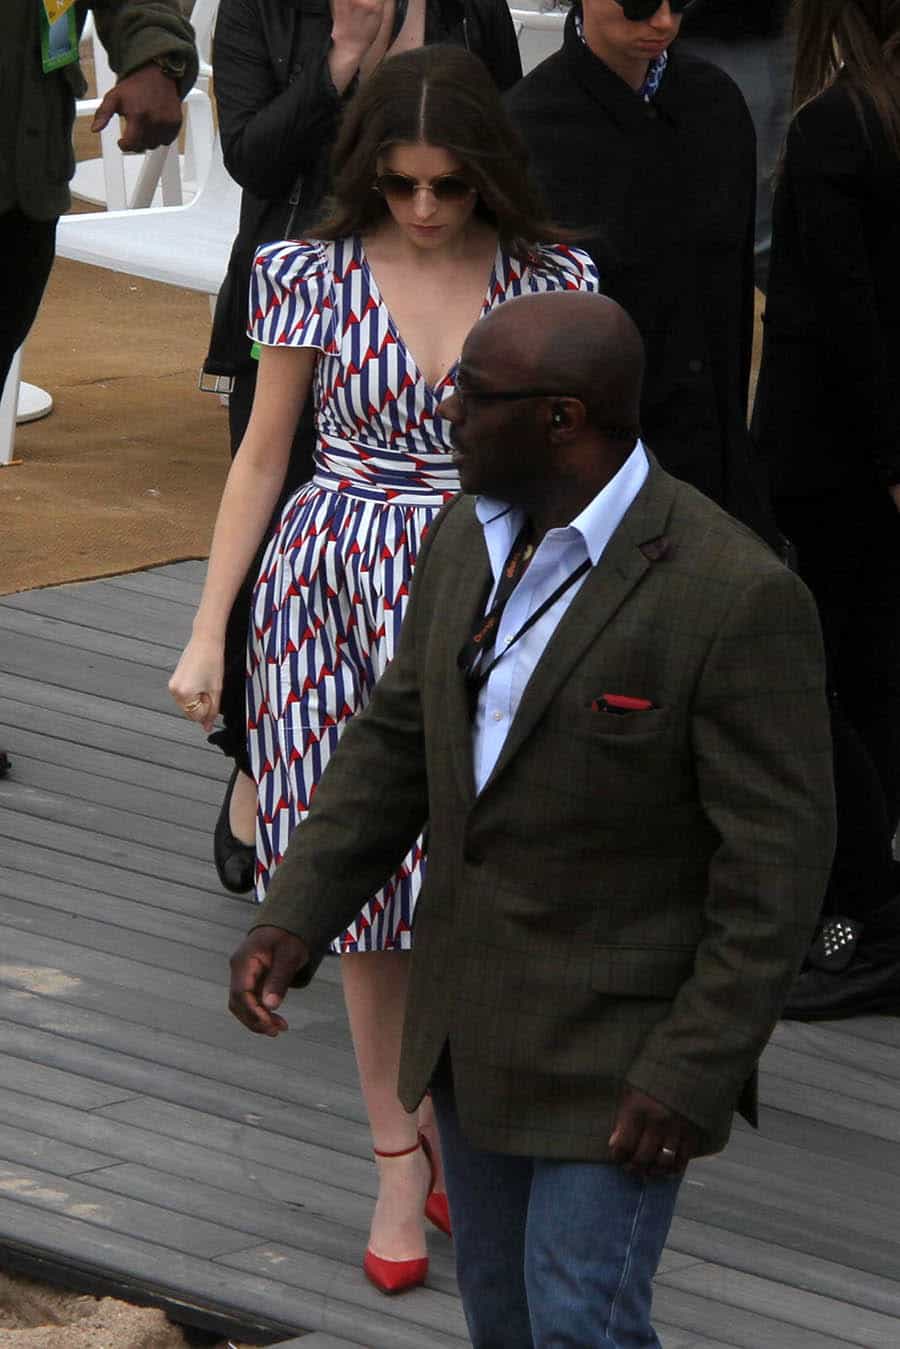 Justin Timberlake and Anna Kendrick seen in Cannes before attending the photocall of their new film 'Trolls'.